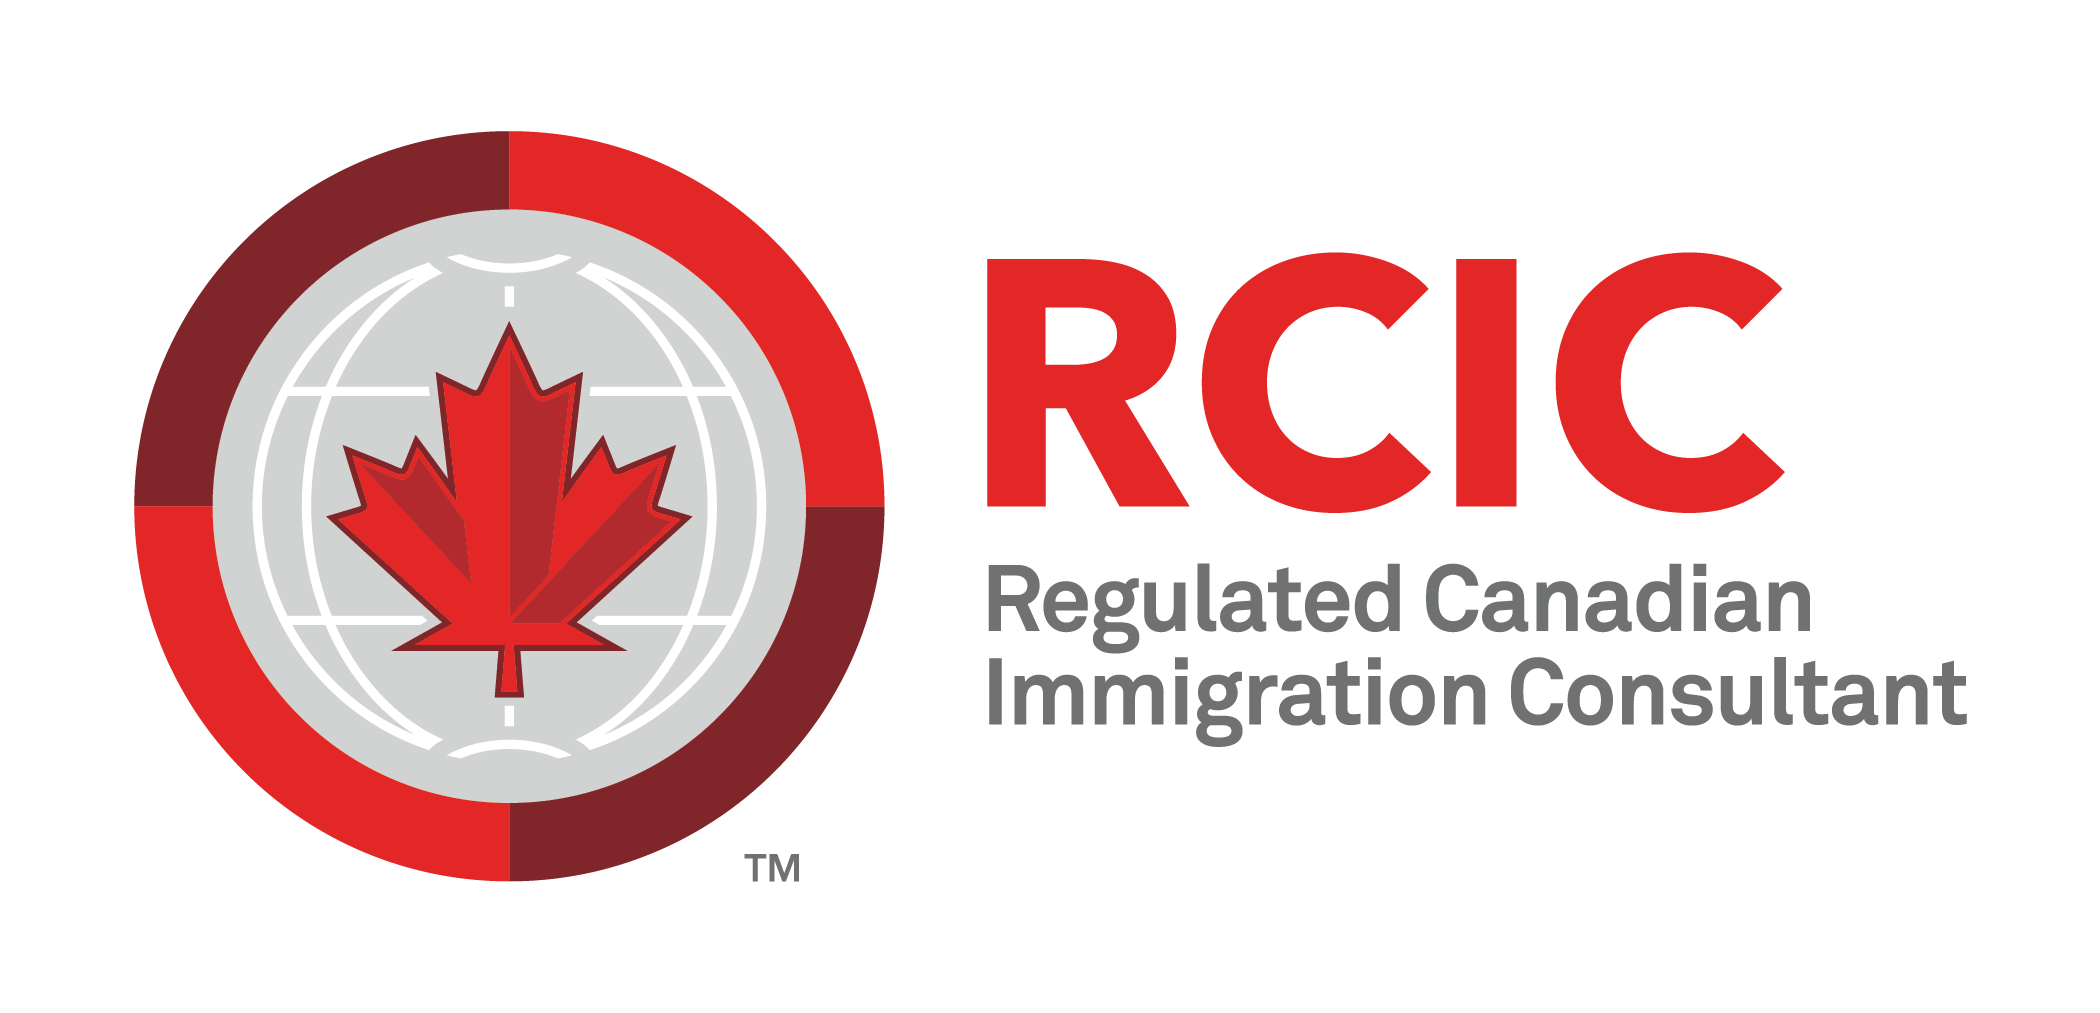 Tips on how to immigrate to Canada with a registered Canadian immigration consultant